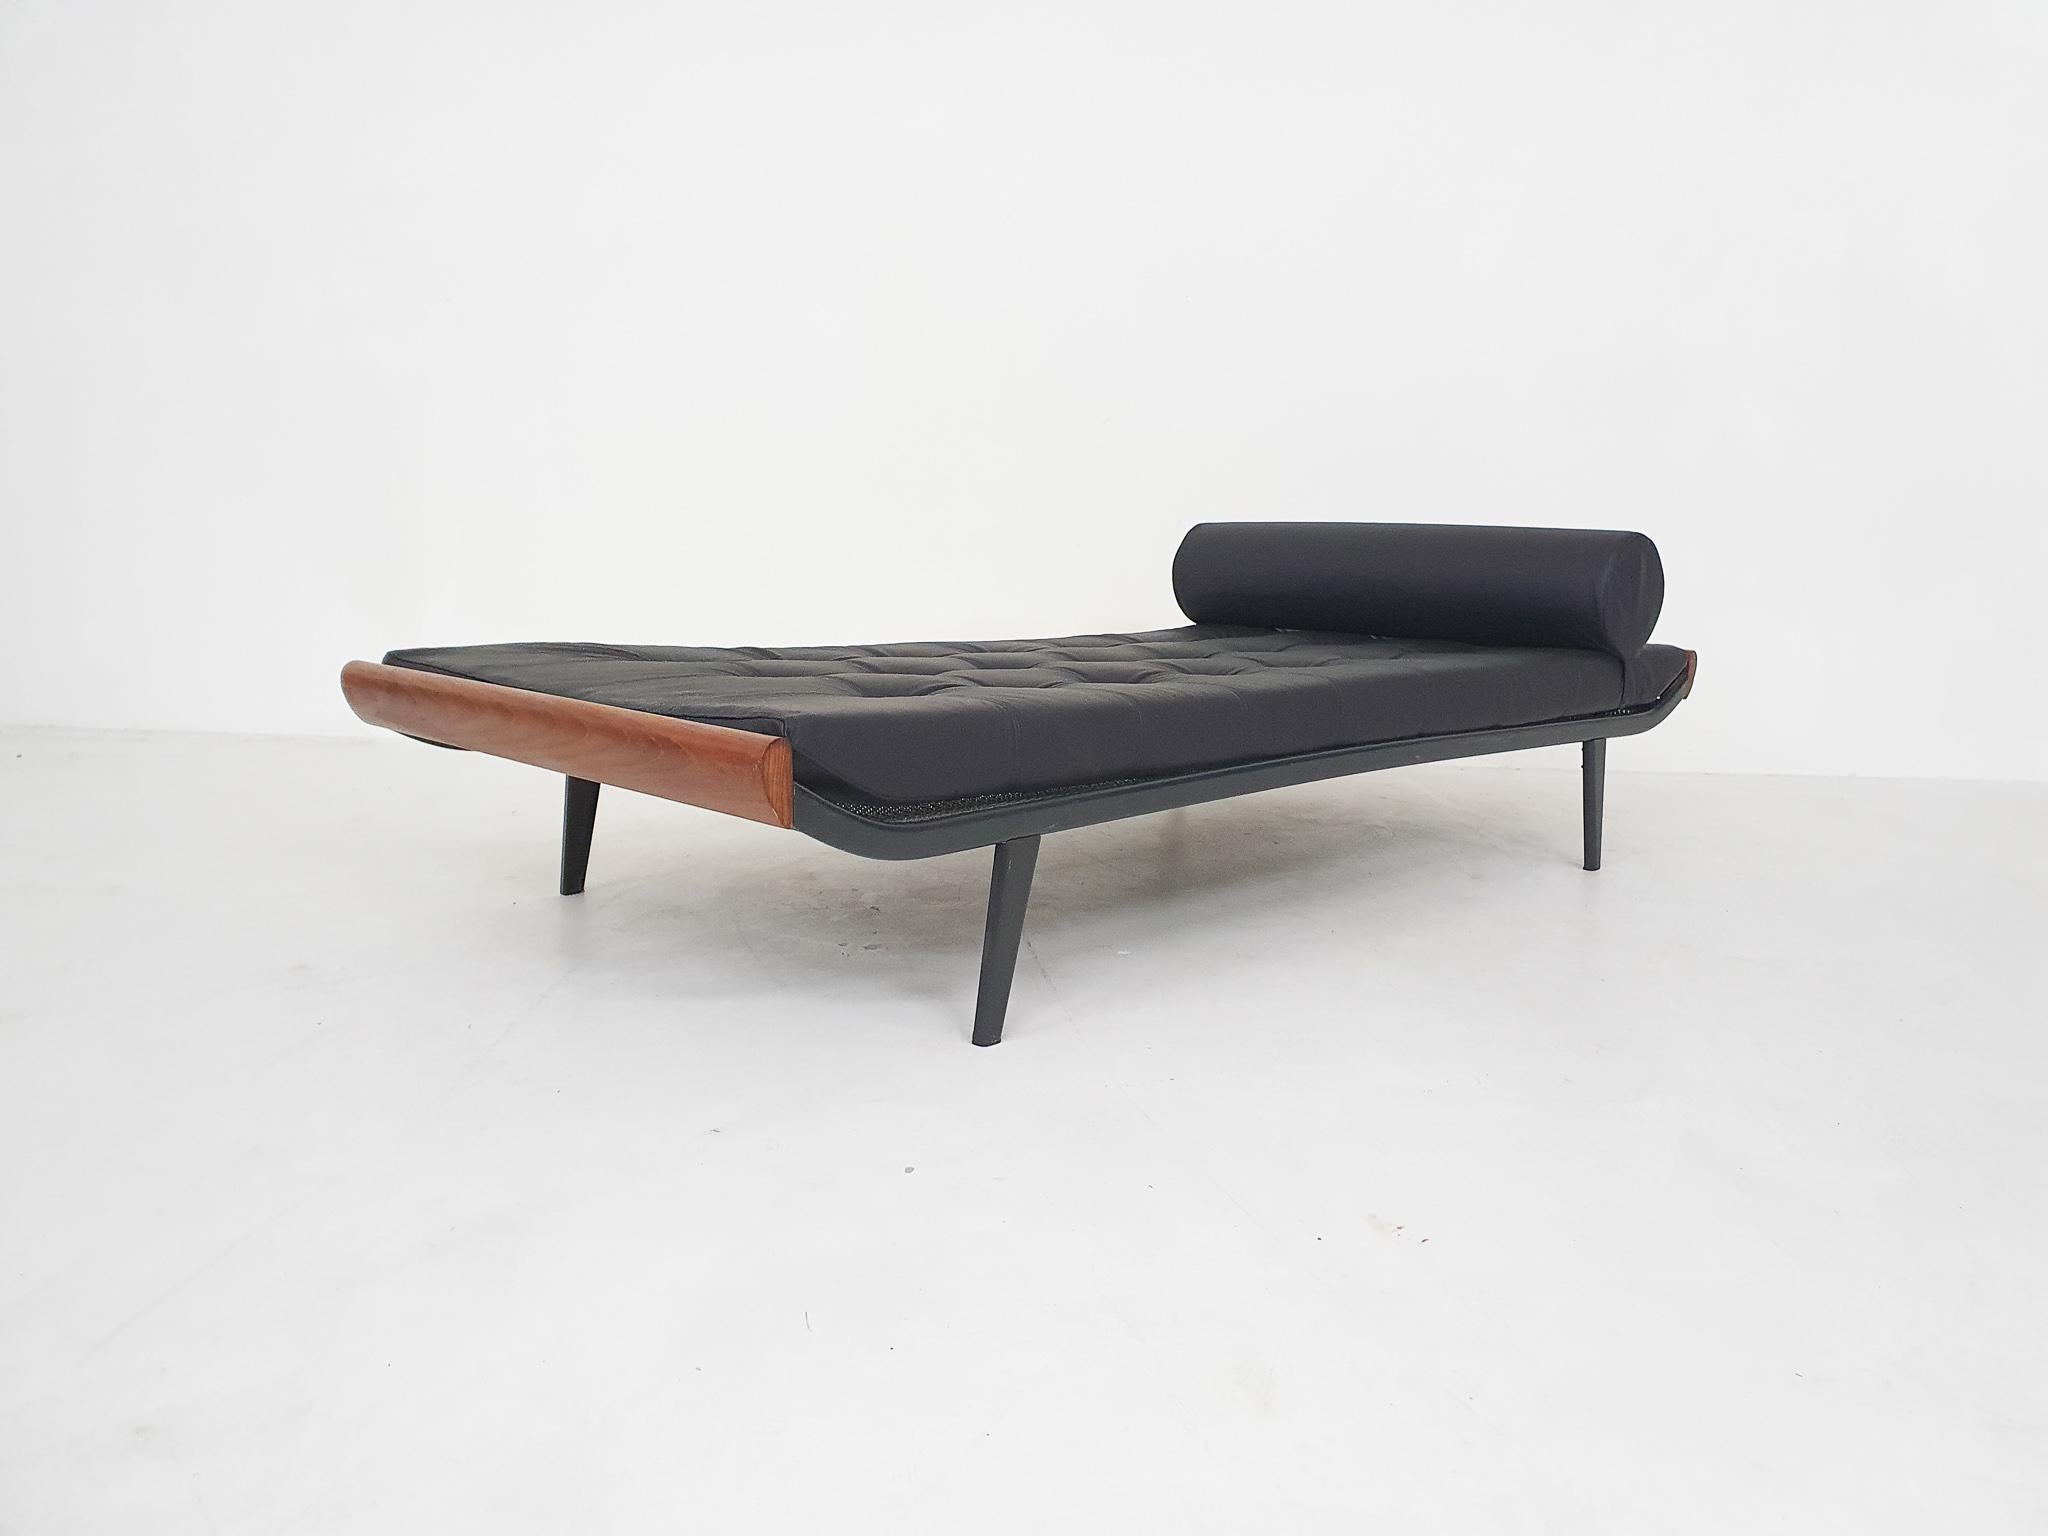 Metal Black Leather A.R. Cordemeyer for Auping “Cleopatra” Daybed The Netherlands 1953